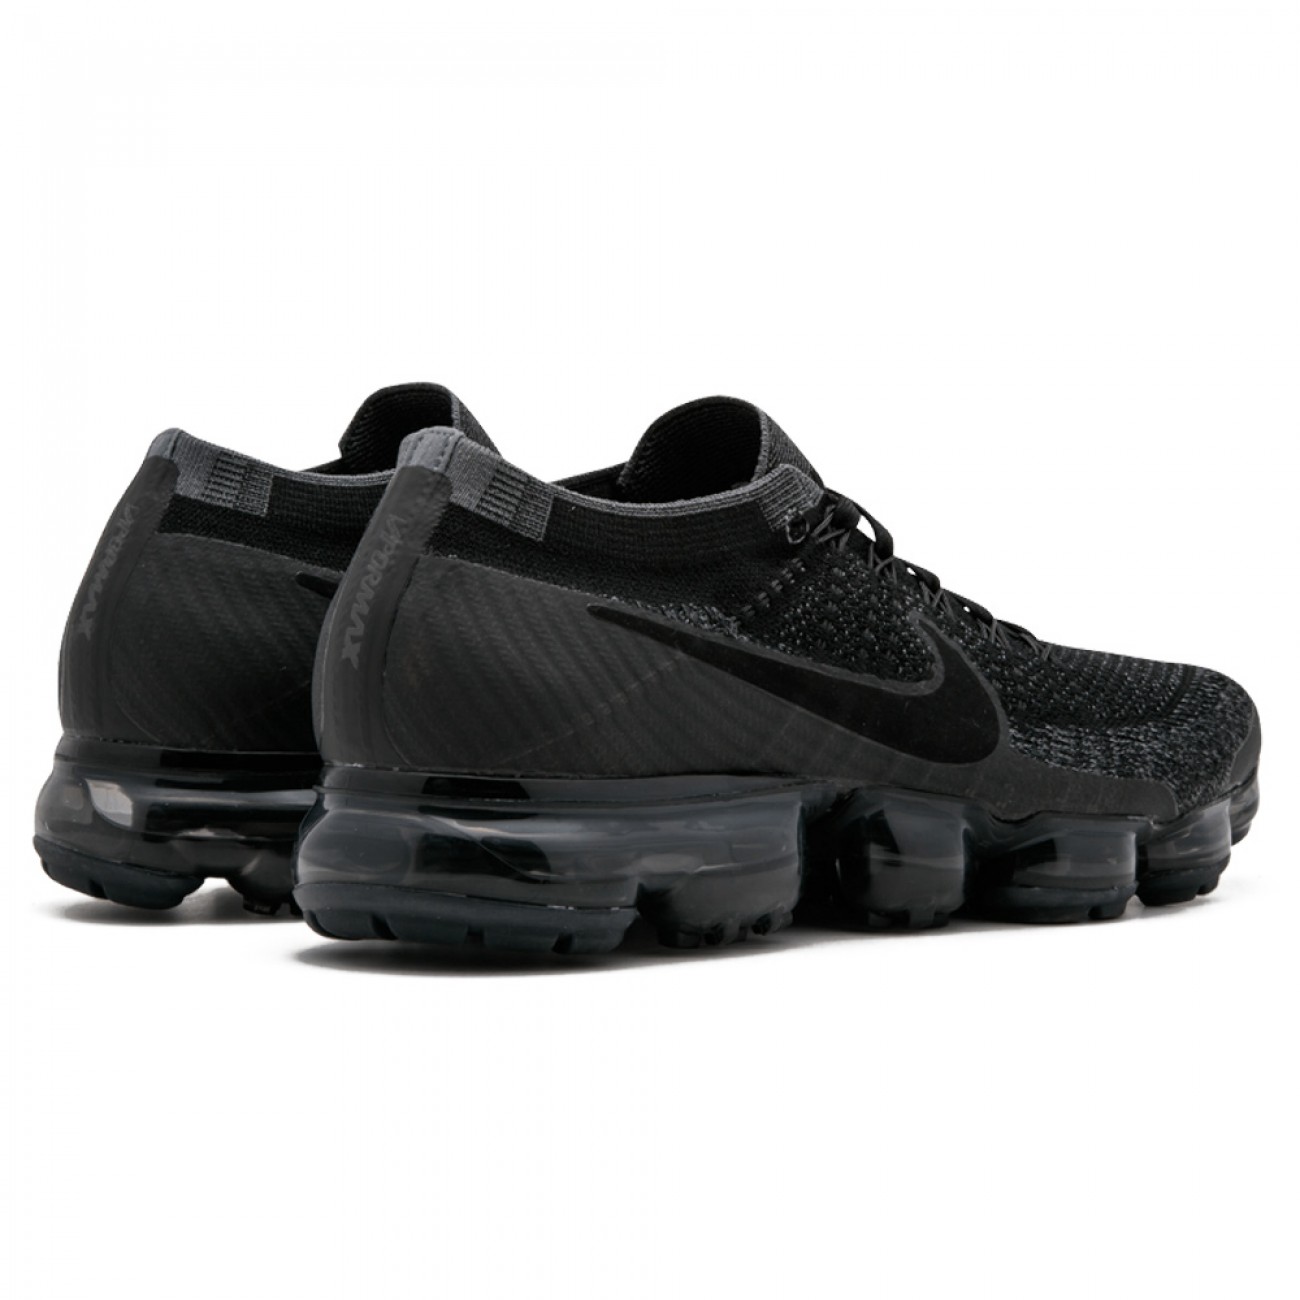 NIKE AIR VAPORMAX FLYKNIT BLACK/ANTHRACITE